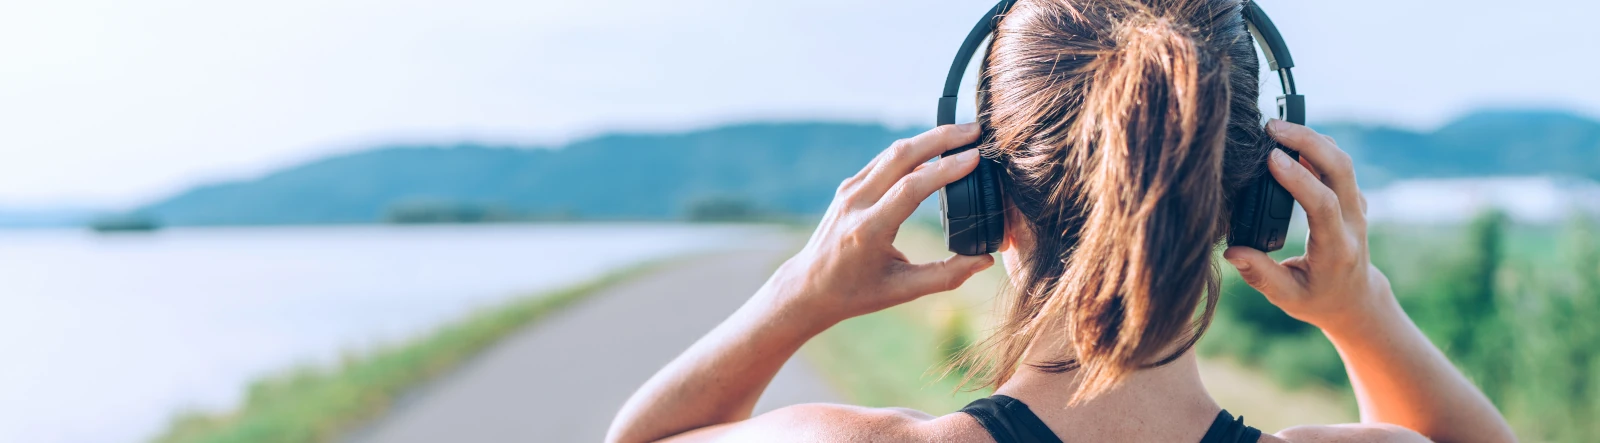 A view from behind of a woman wearing headphones and looking into the distance